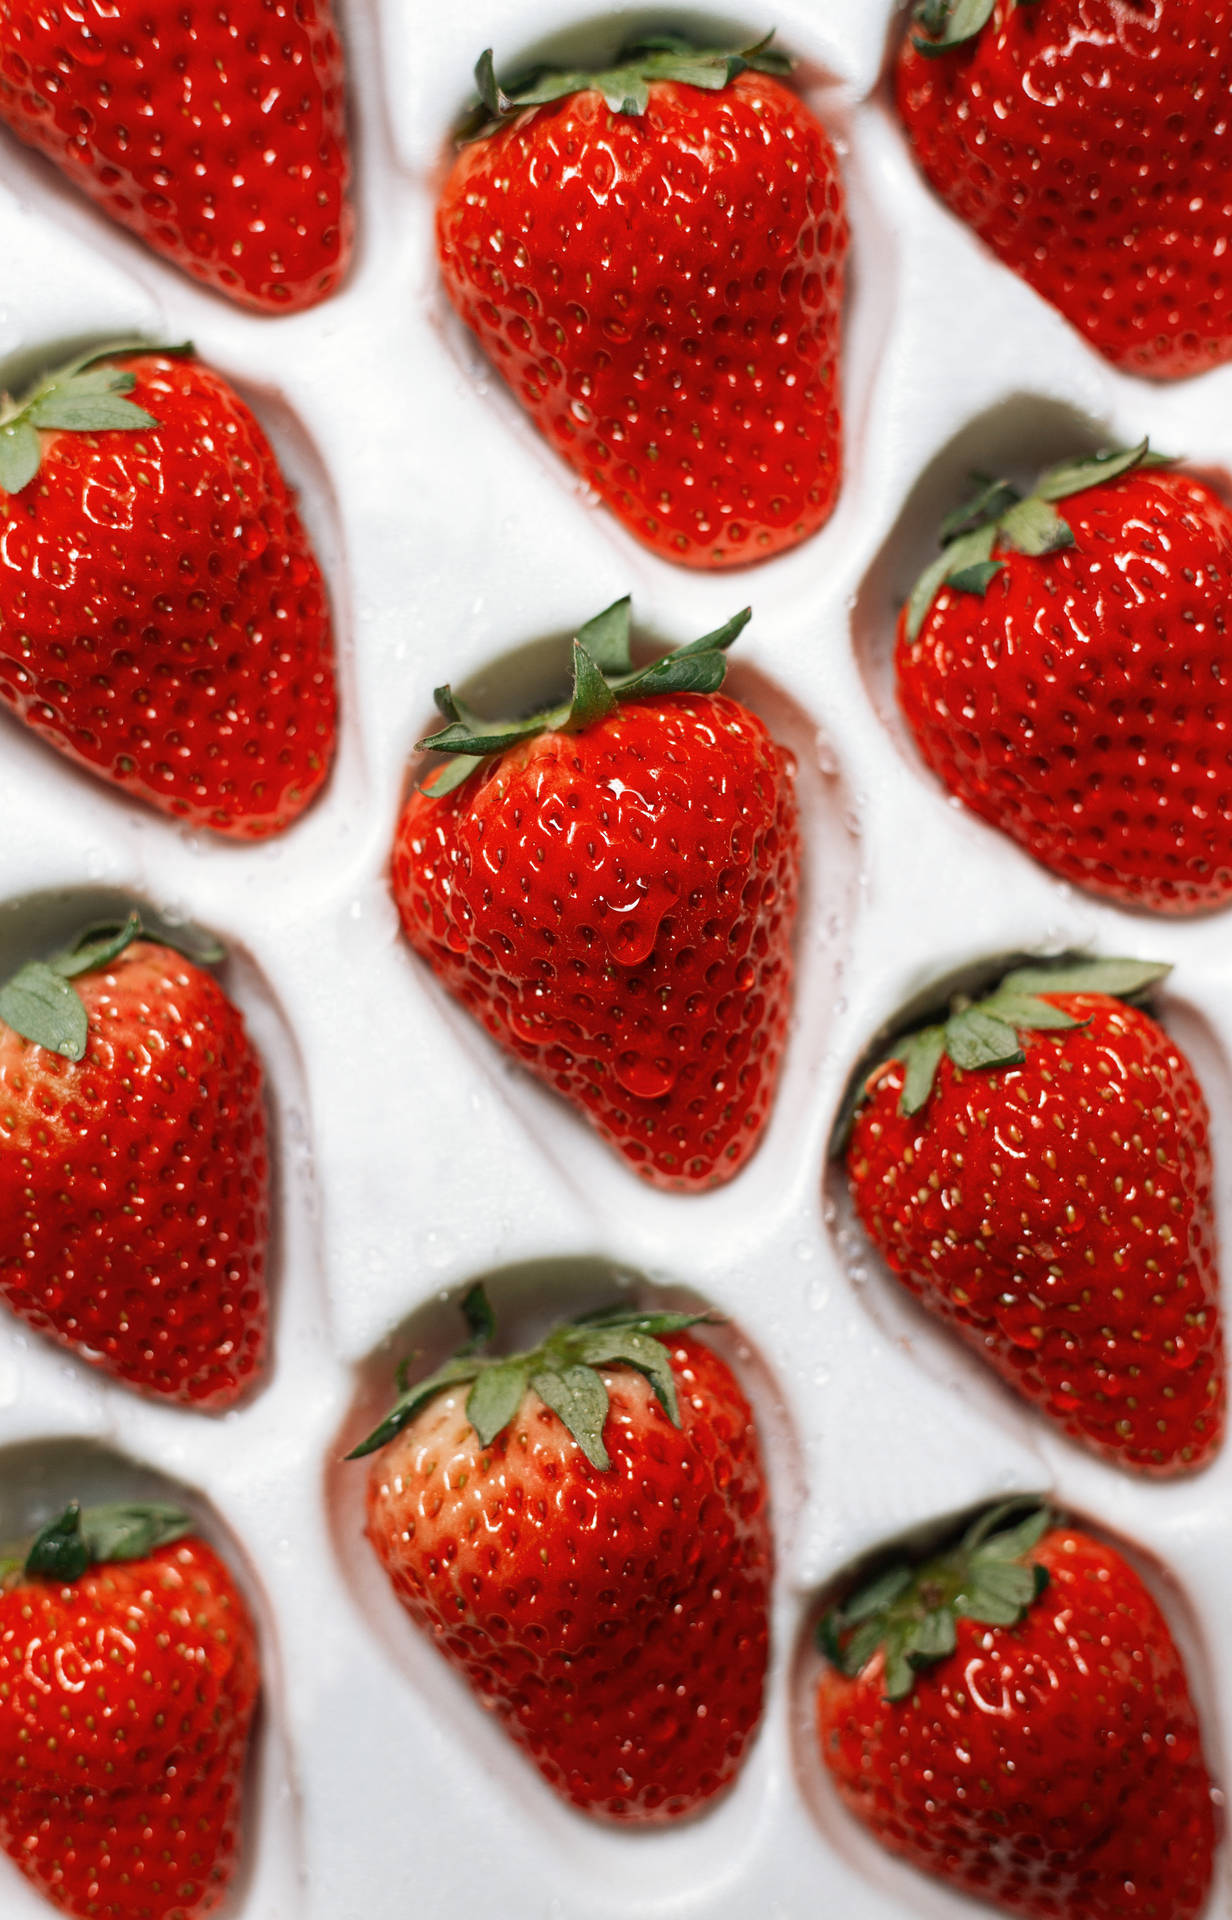 Strawberry 3851X6000 Wallpaper and Background Image